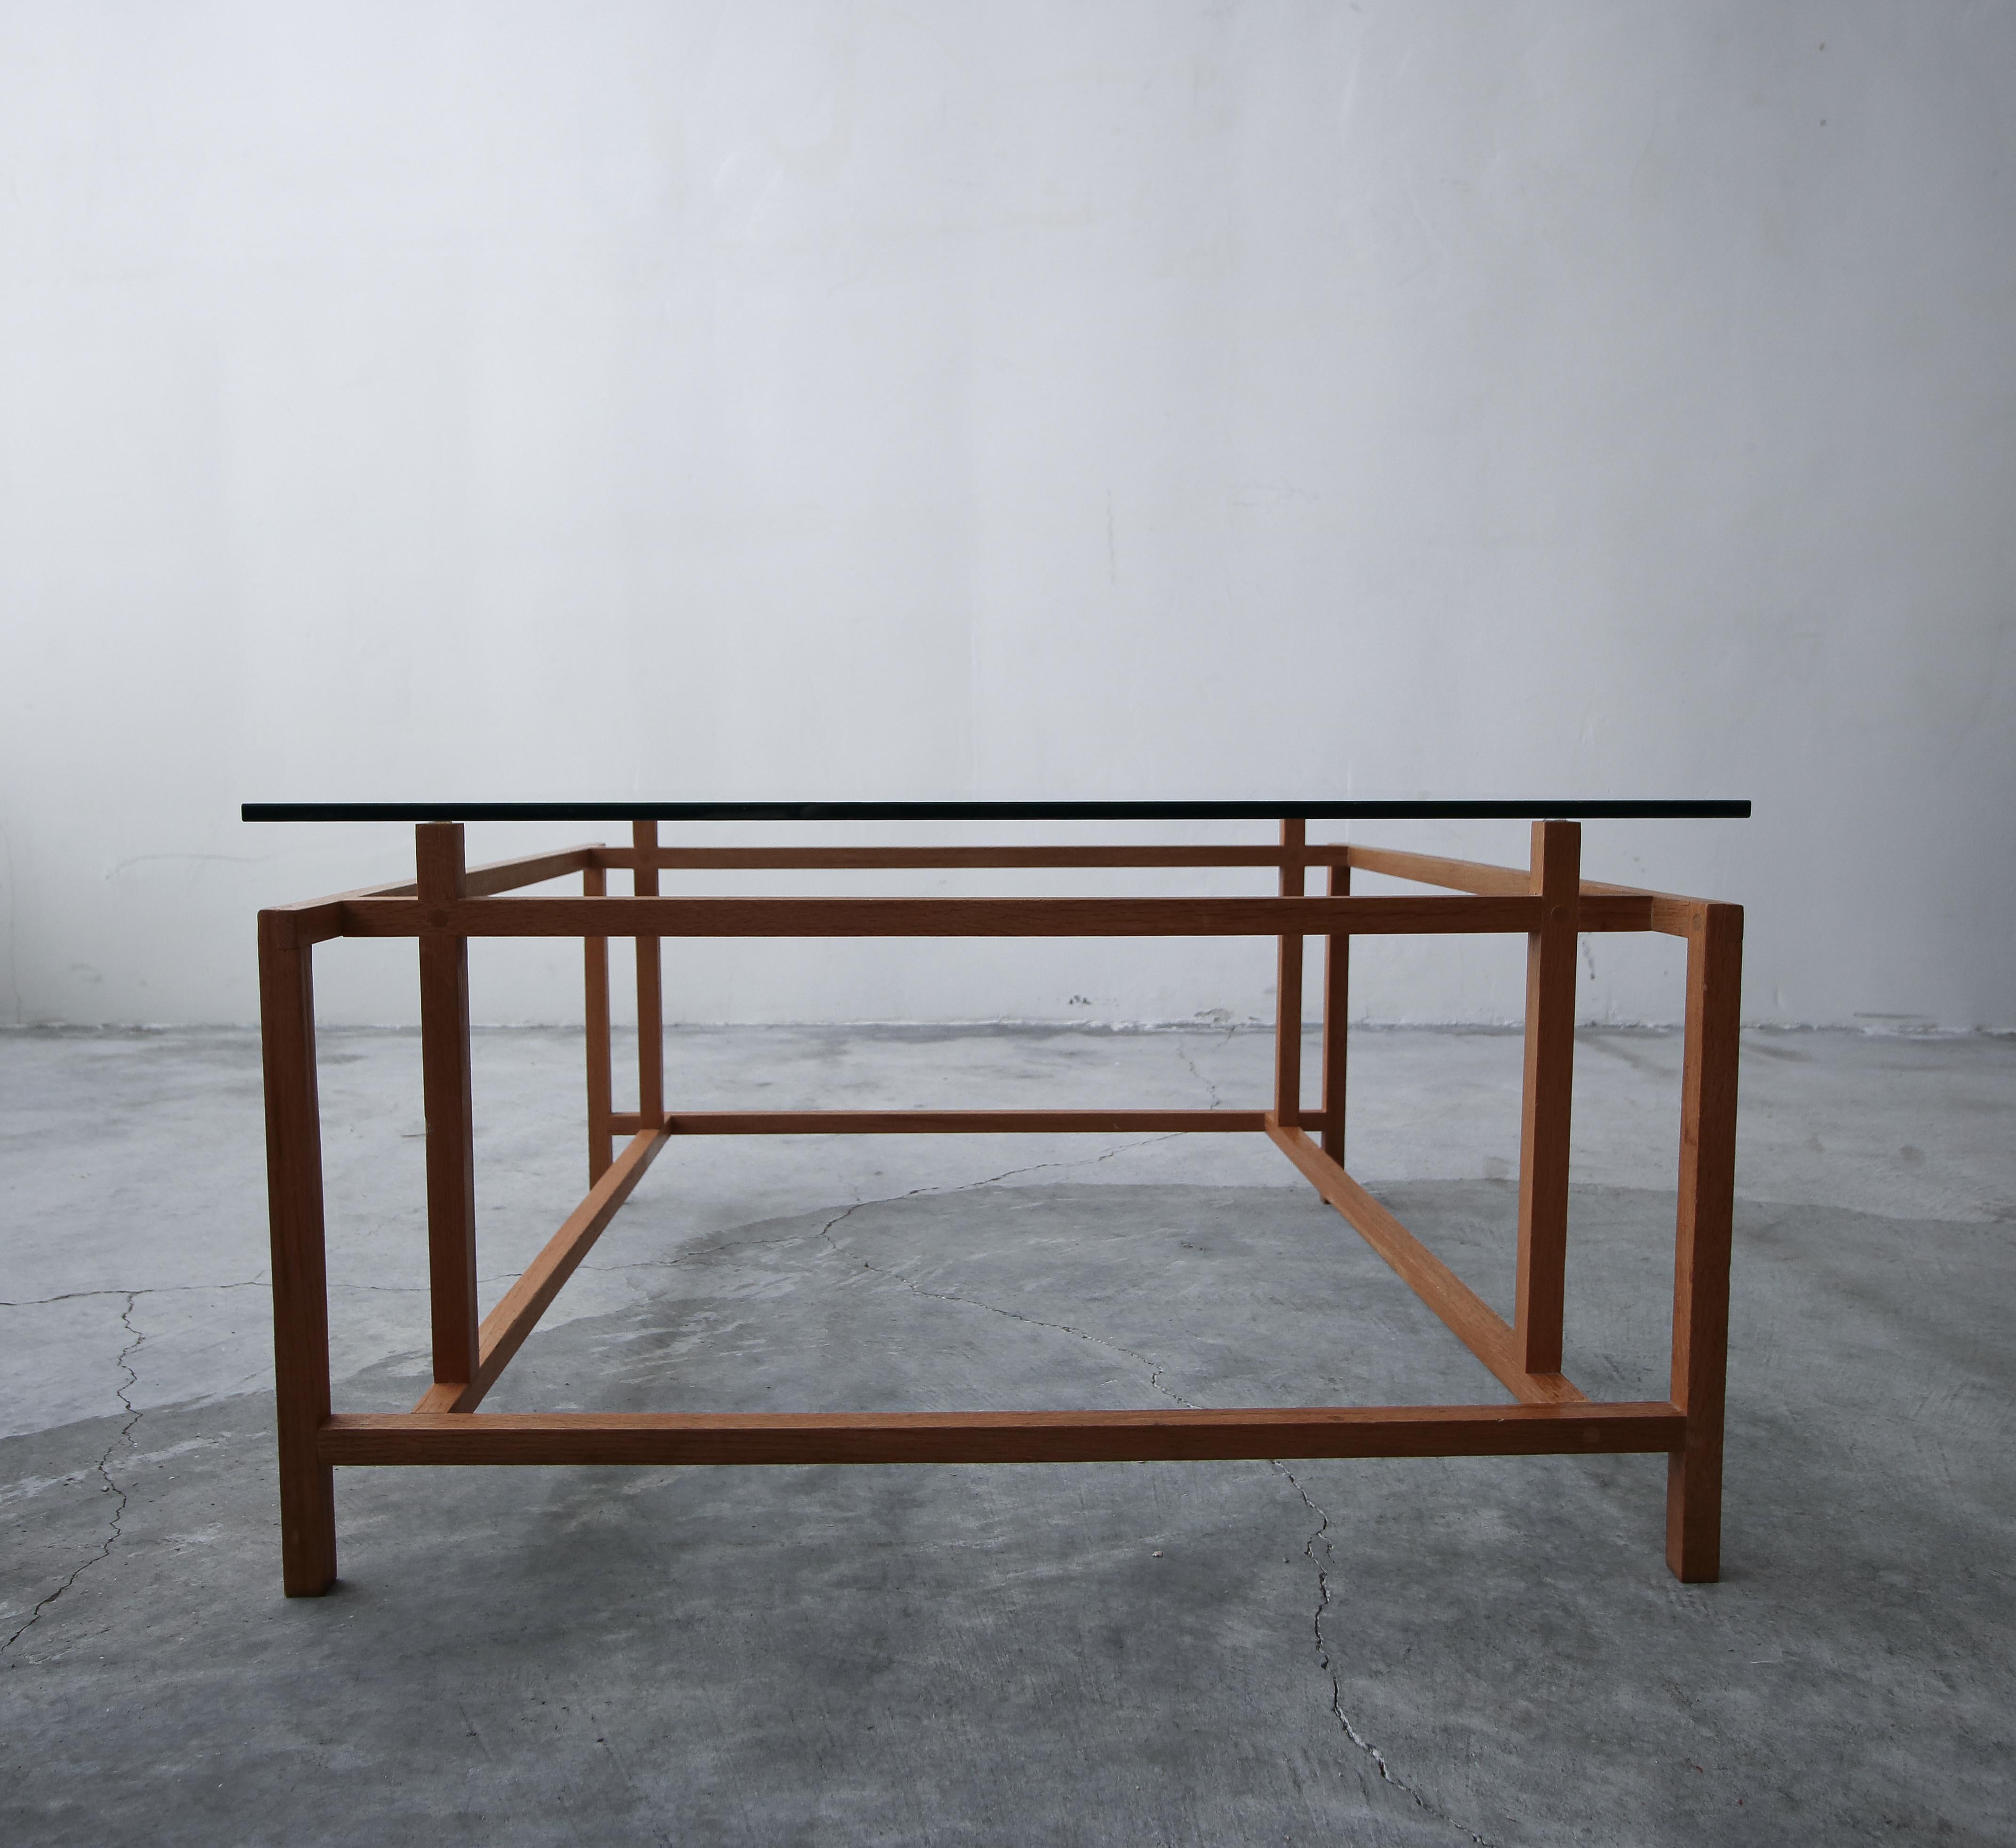 Midcentury Danish teak coffee table by Henning Norgaard for Komfort. A very simple yet beautiful table with a very architectural appearance.

The table is in excellent condition overall. Glass has minor scratches from age and use but overall there